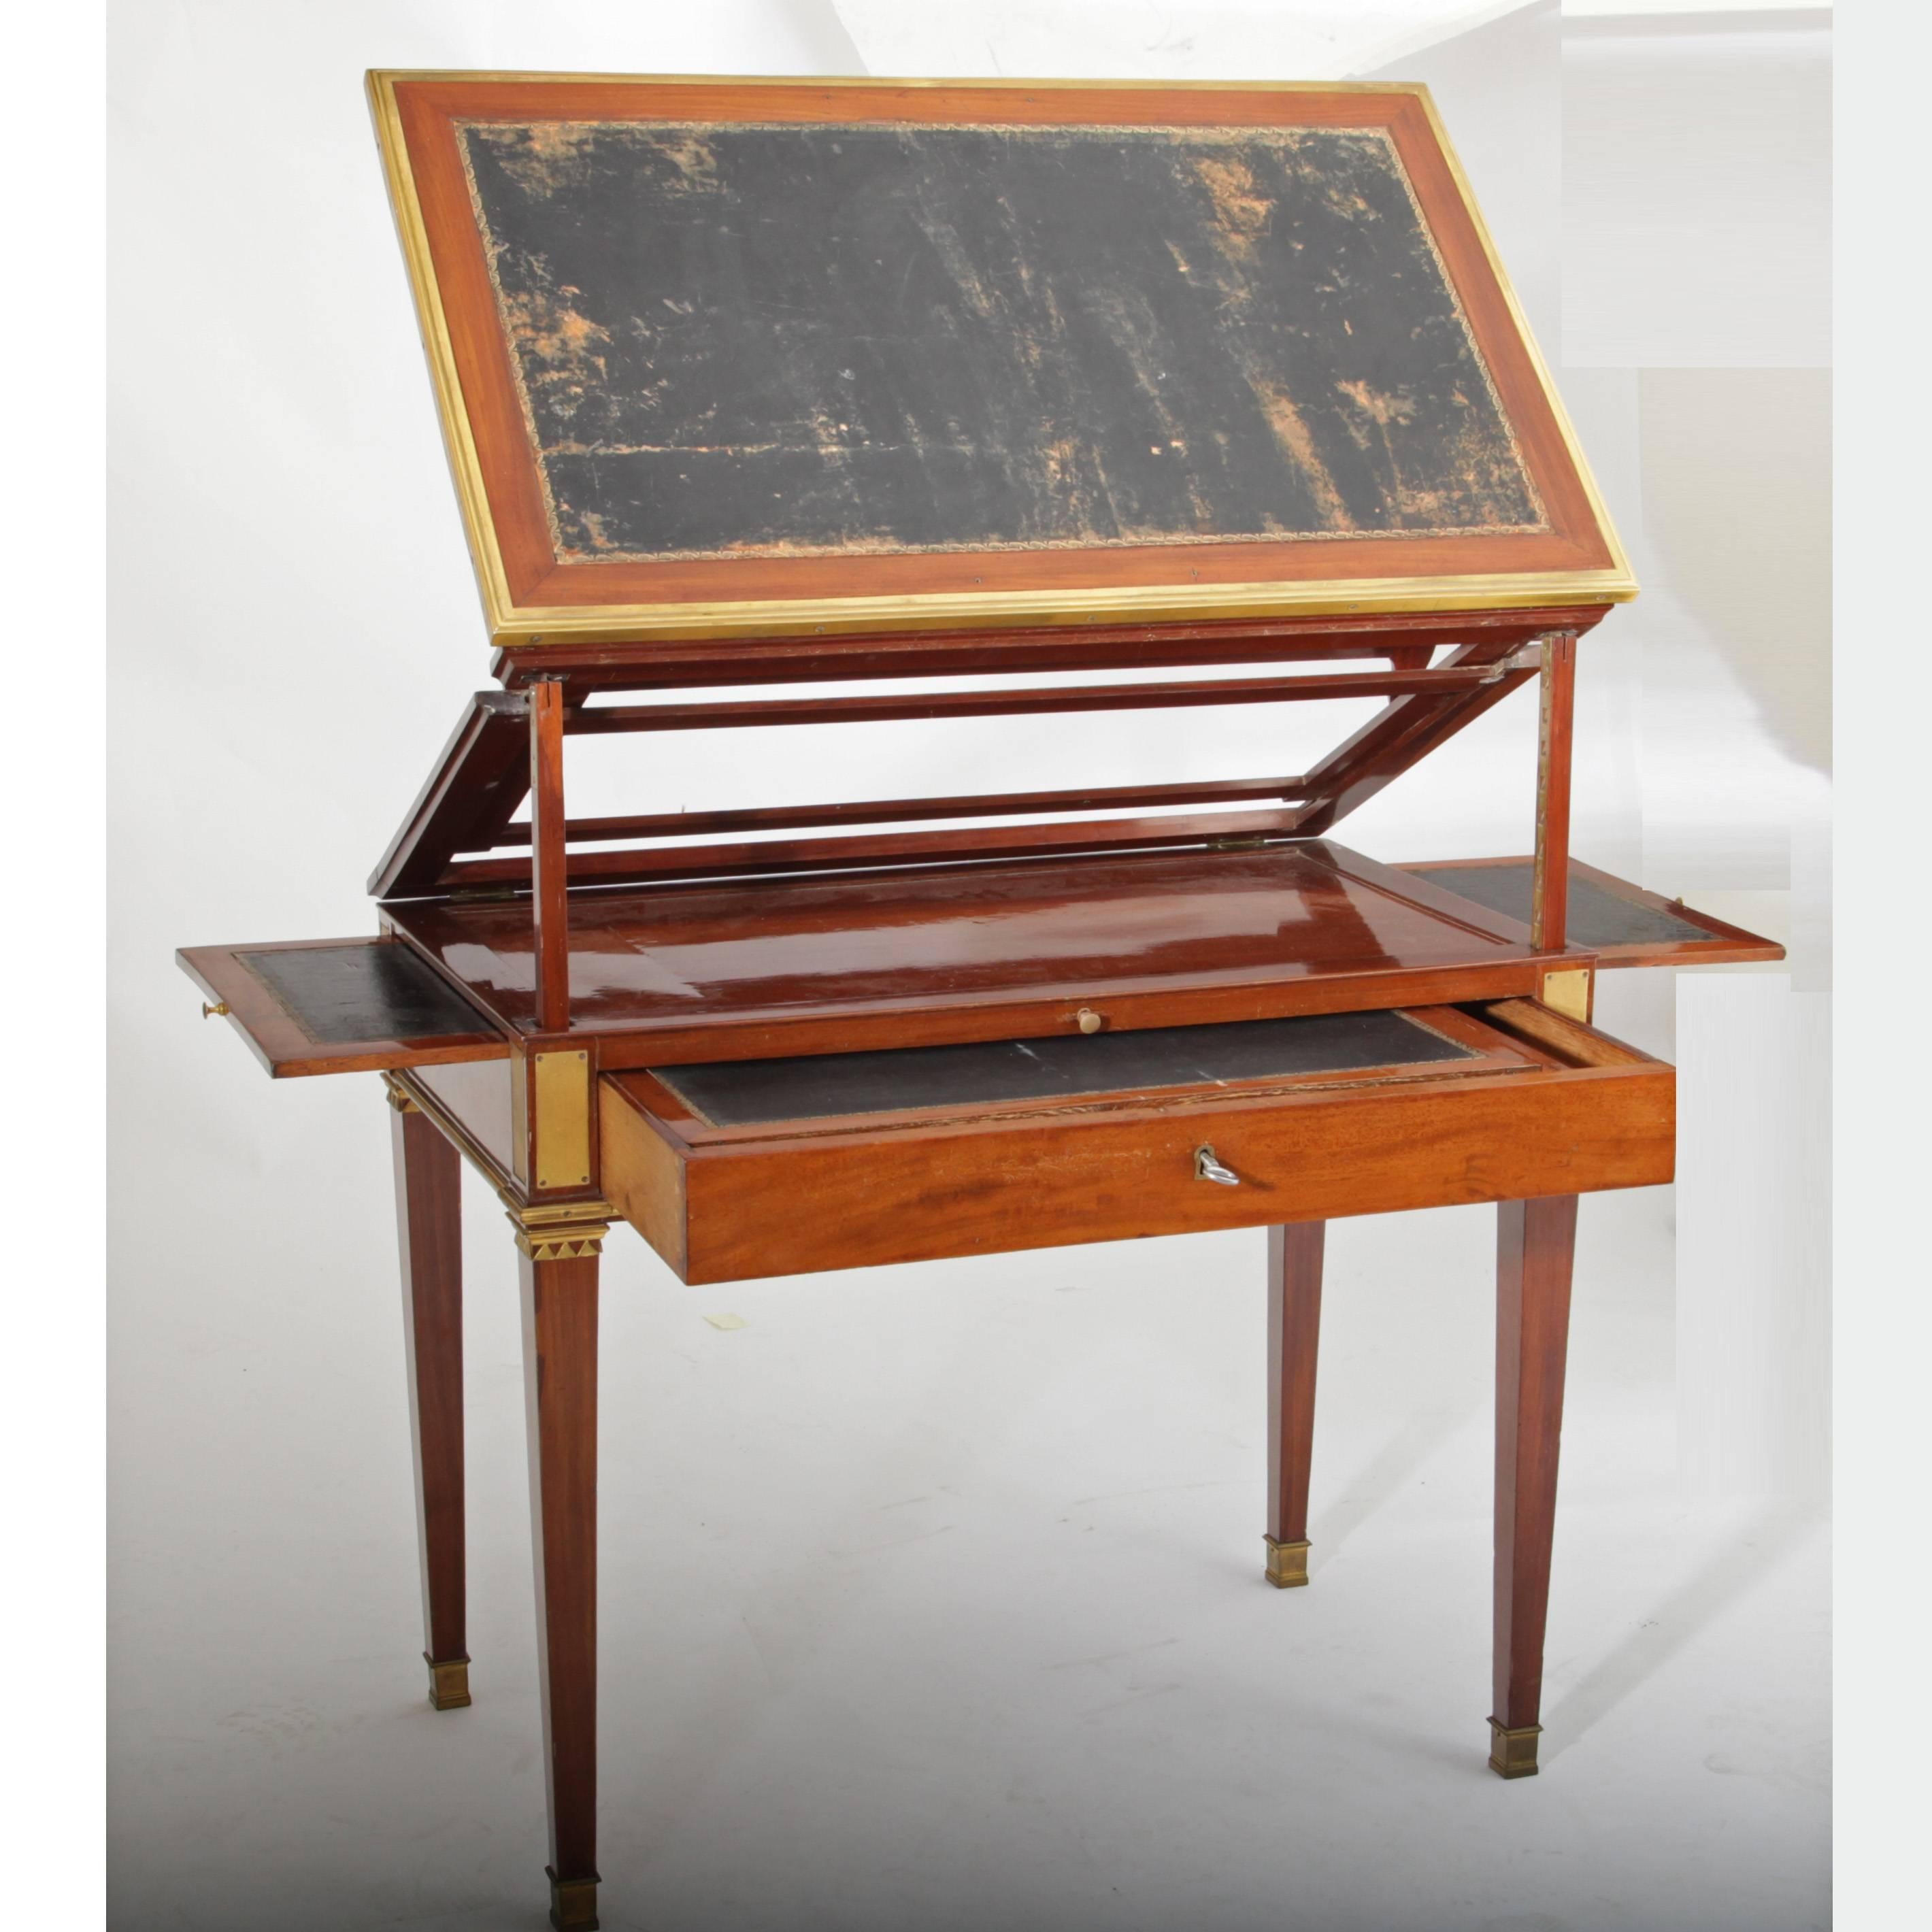 Writing desk with height adjustable writing surface, laterally extendable as well. The desk stands on tapered feet with brass sabots. The writing surfaces are covered in black leather. 